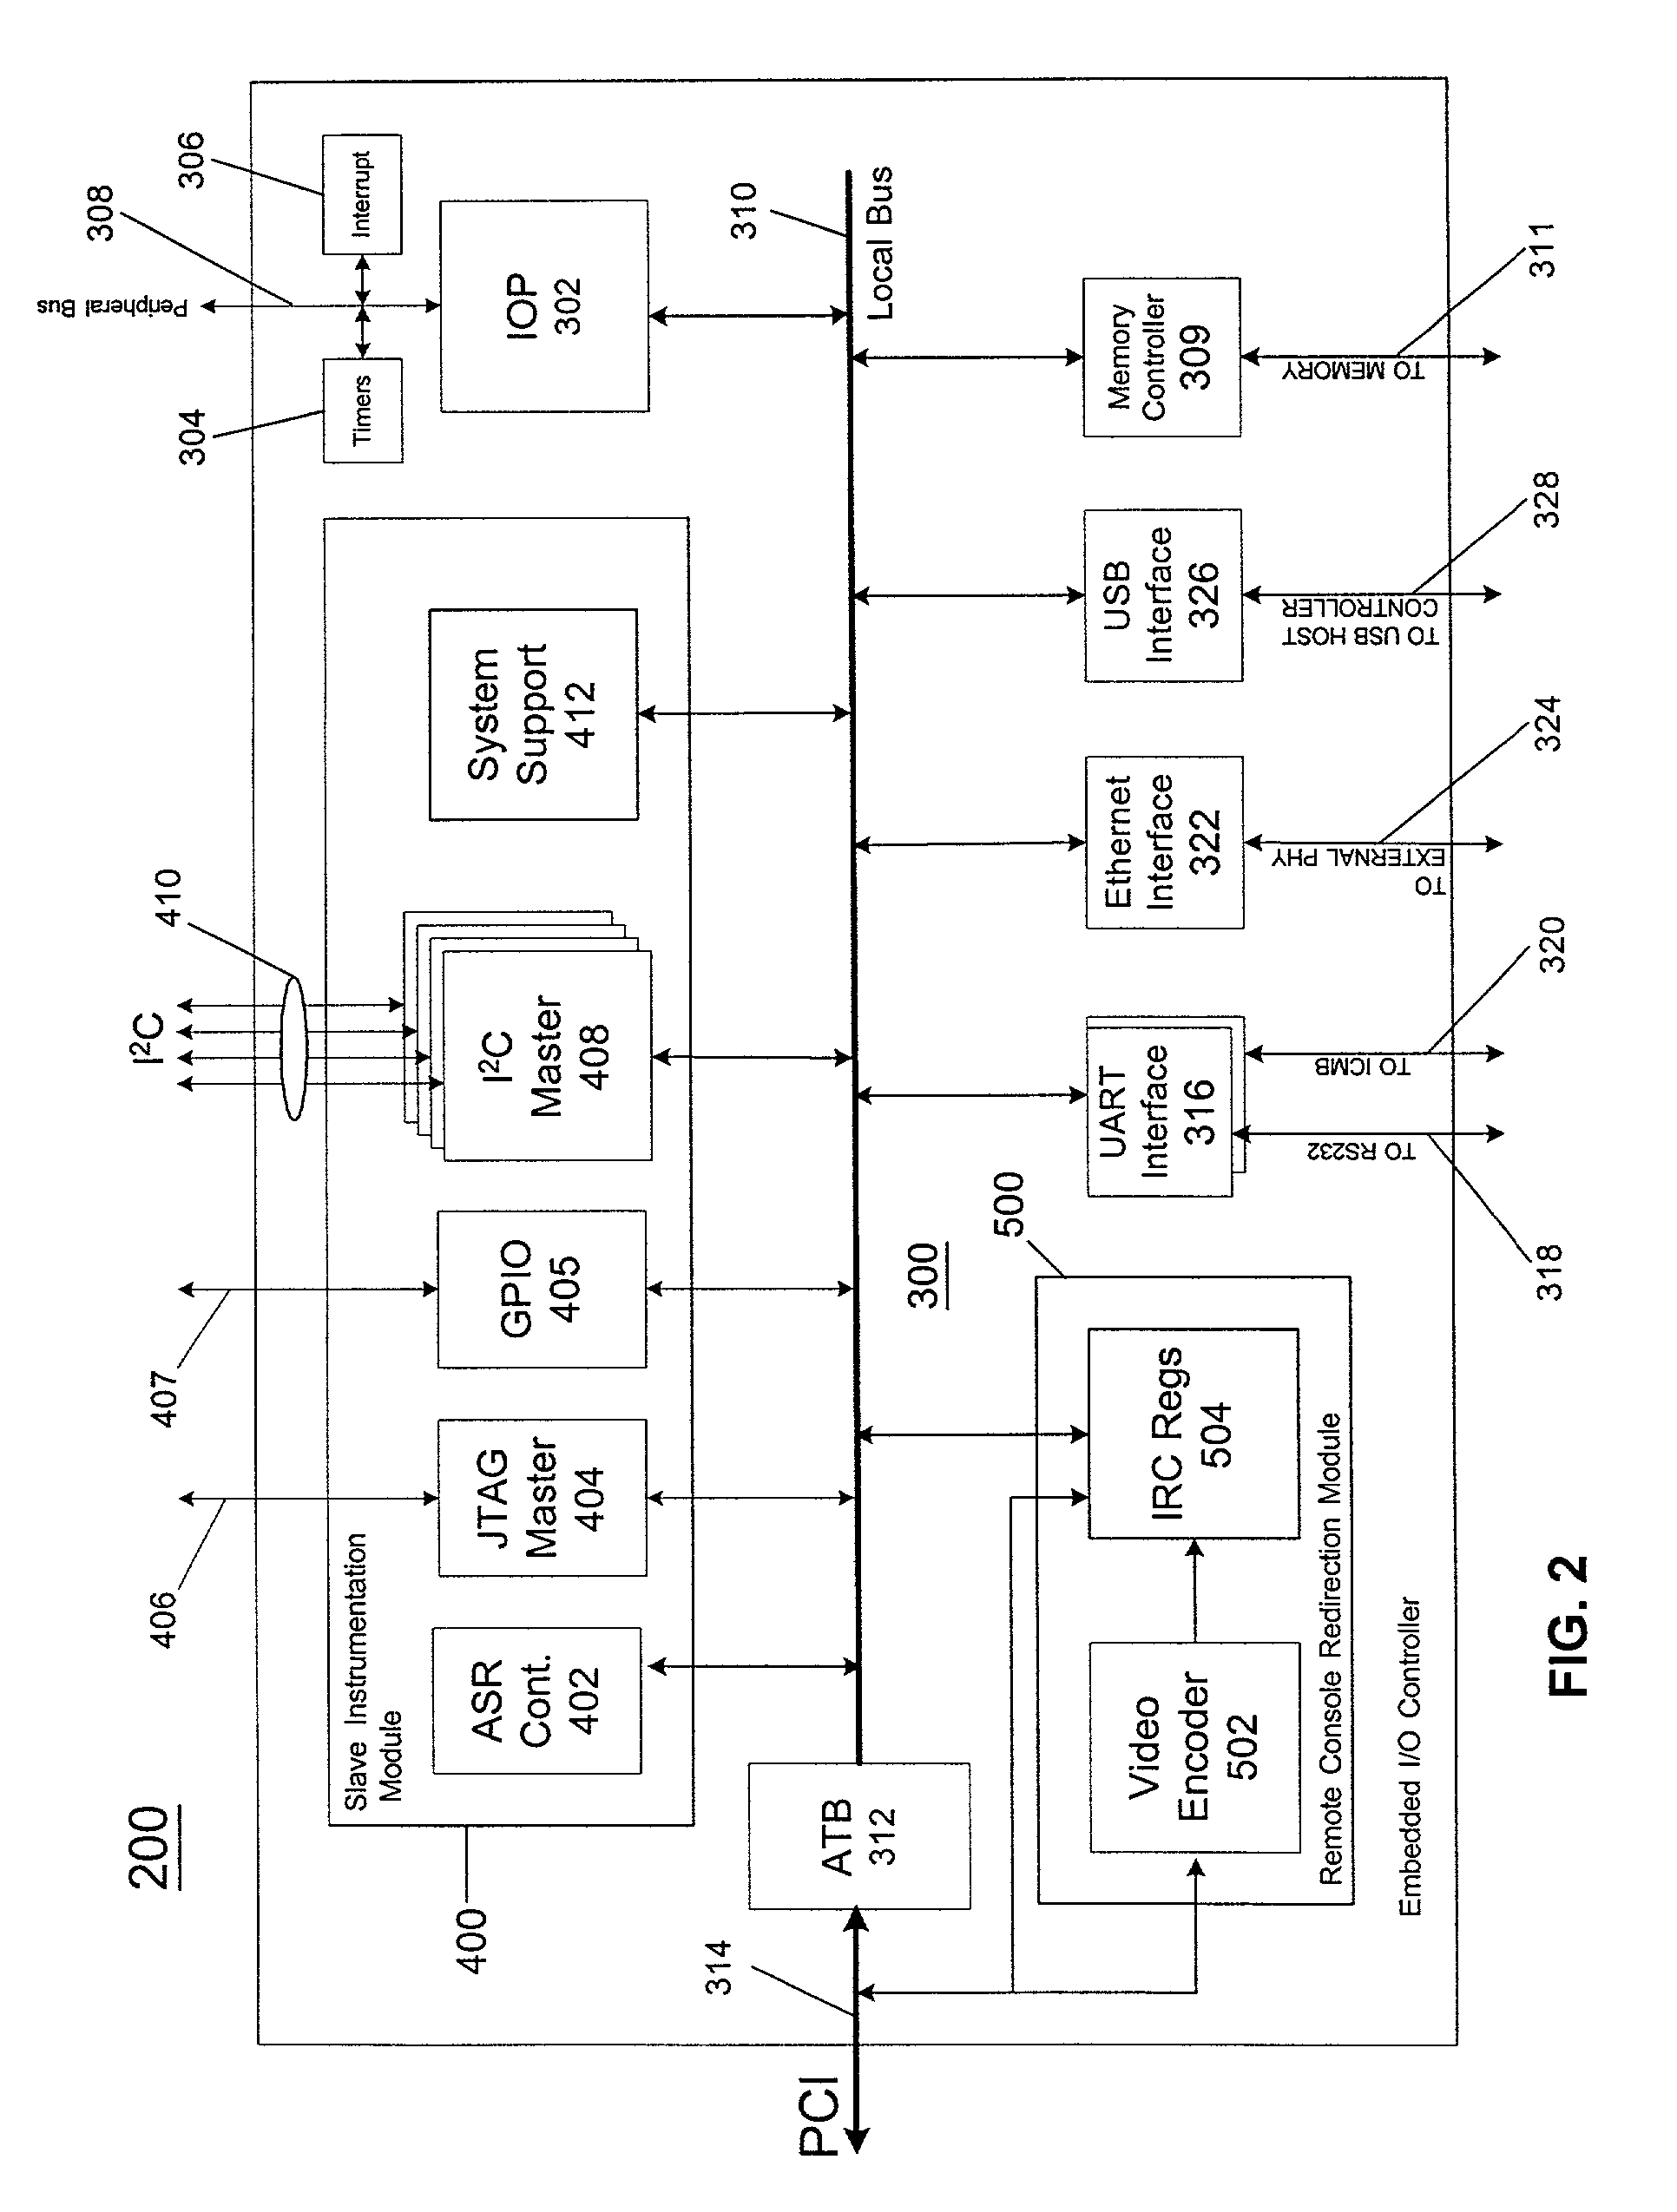 Method and apparatus for providing JTAG functionality in a remote server management controller